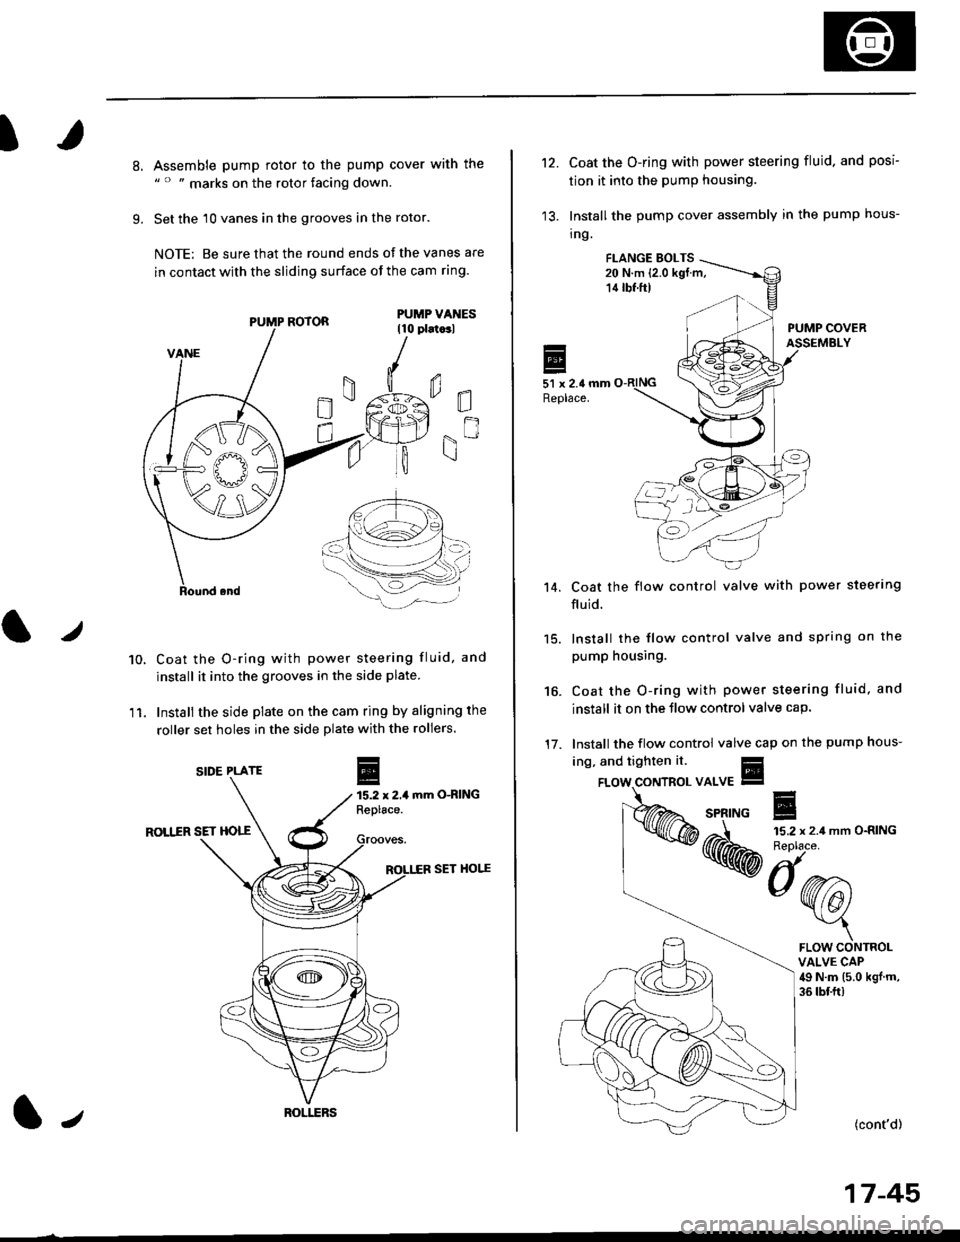 HONDA CIVIC 1996 6.G Owners Guide I
8.
9.
Assemble pump rotor to the pump cover with the" " " marks on the rotor facing down.
Set the 10 vanes in the grooves in the rotor.
NOTE: Be sure that the round ends ot the vanes are
in contact 